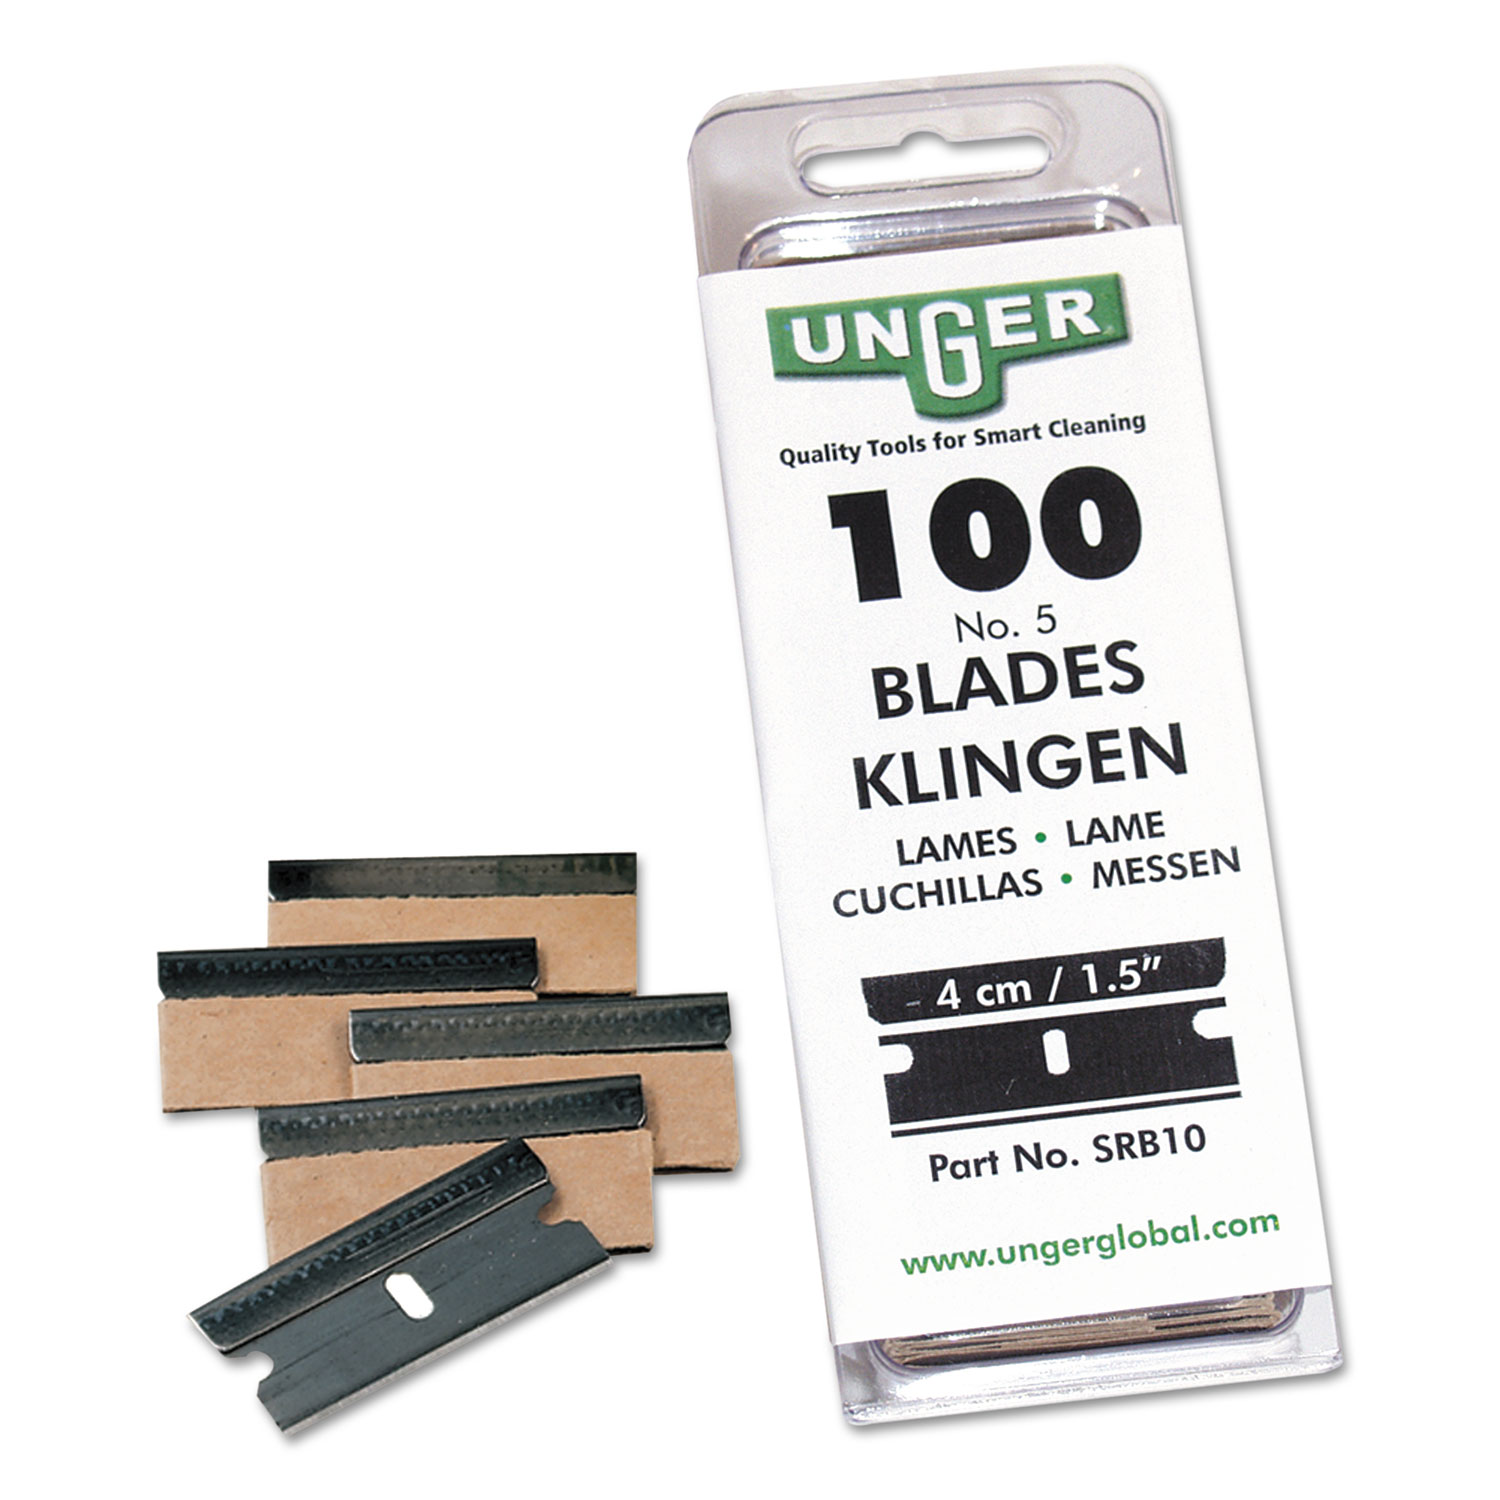  Unger SRB30 Safety Scraper Replacement Blades, #9, Stainless Steel, 100/Box (UNGSRB30) 